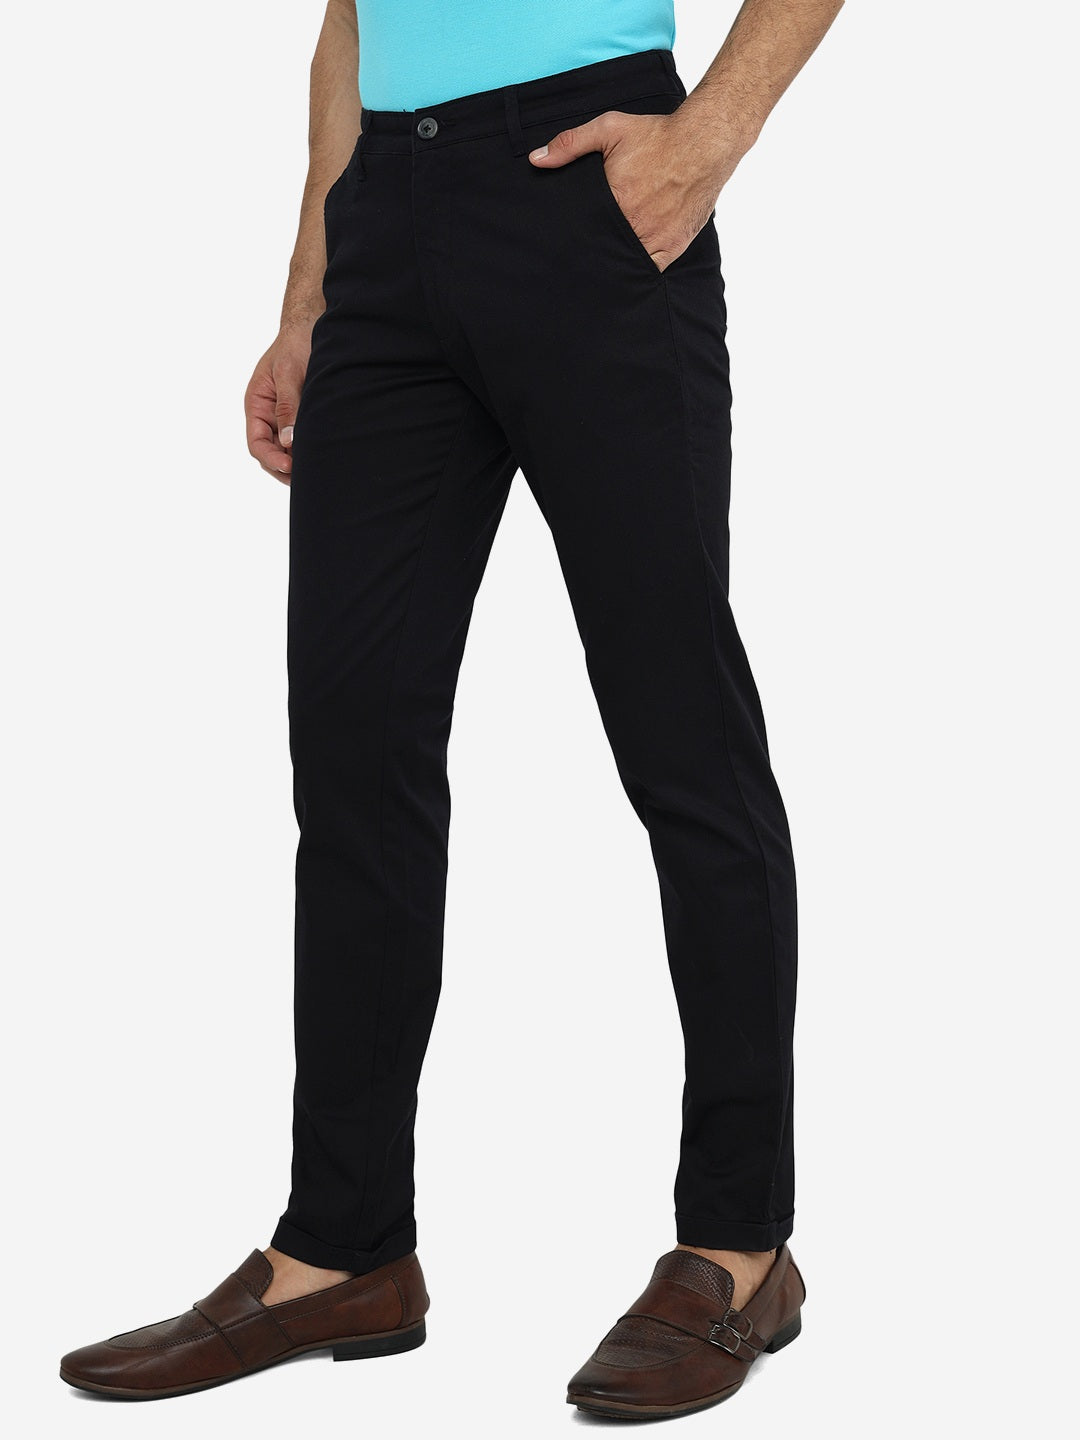 Bluemint | Neo in all day tech black trousers & jeans